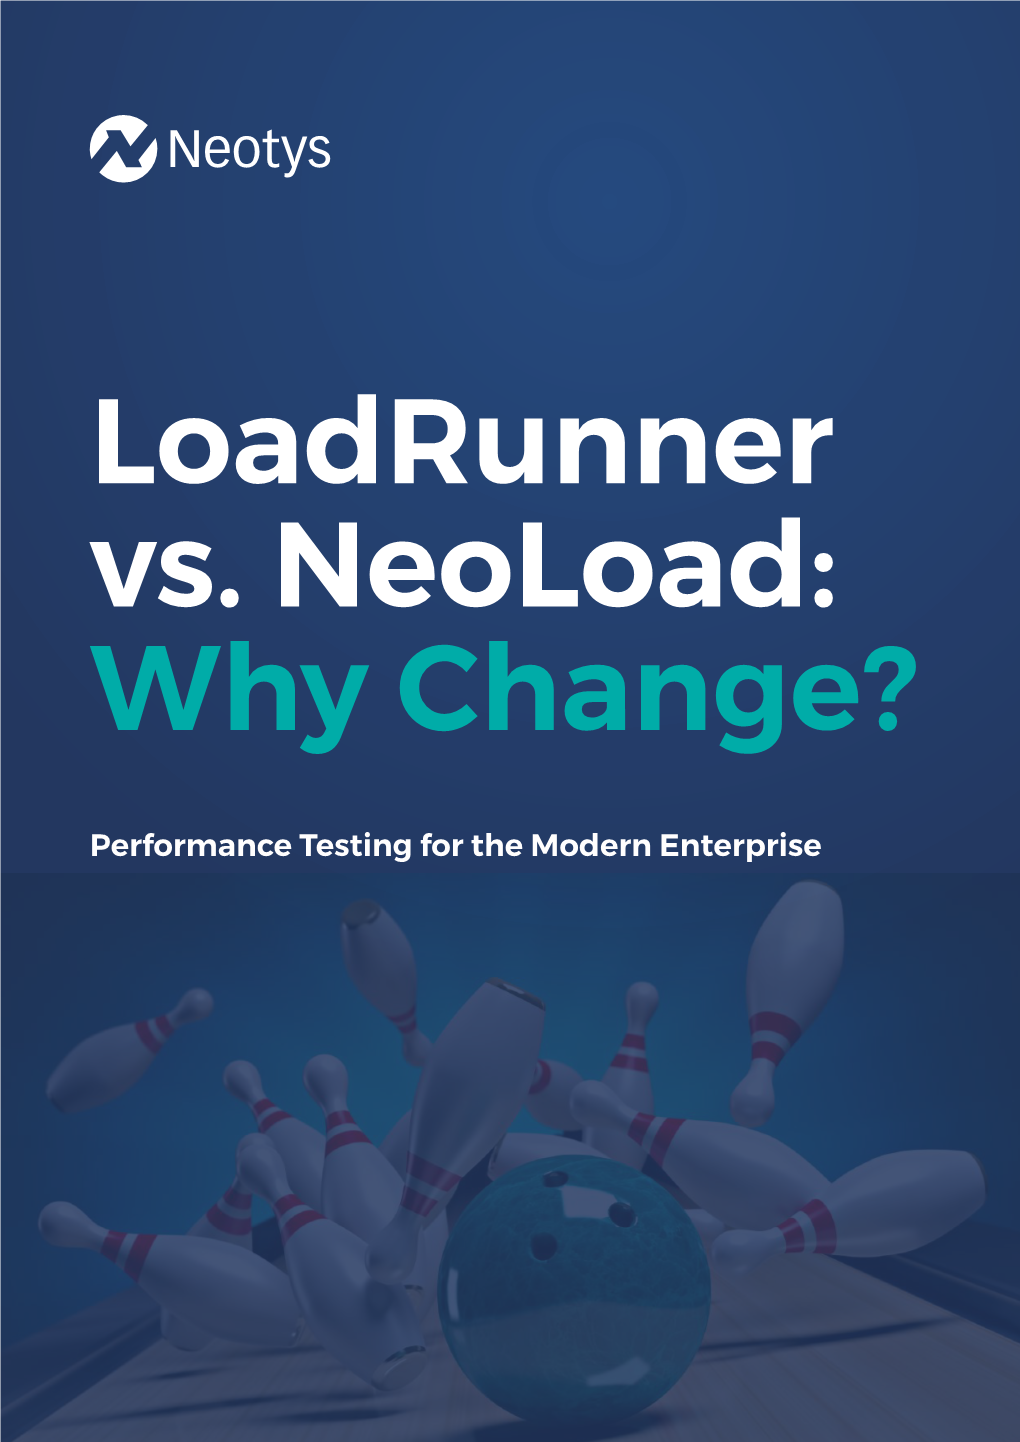 Performance Testing for the Modern Enterprise Executive Summary